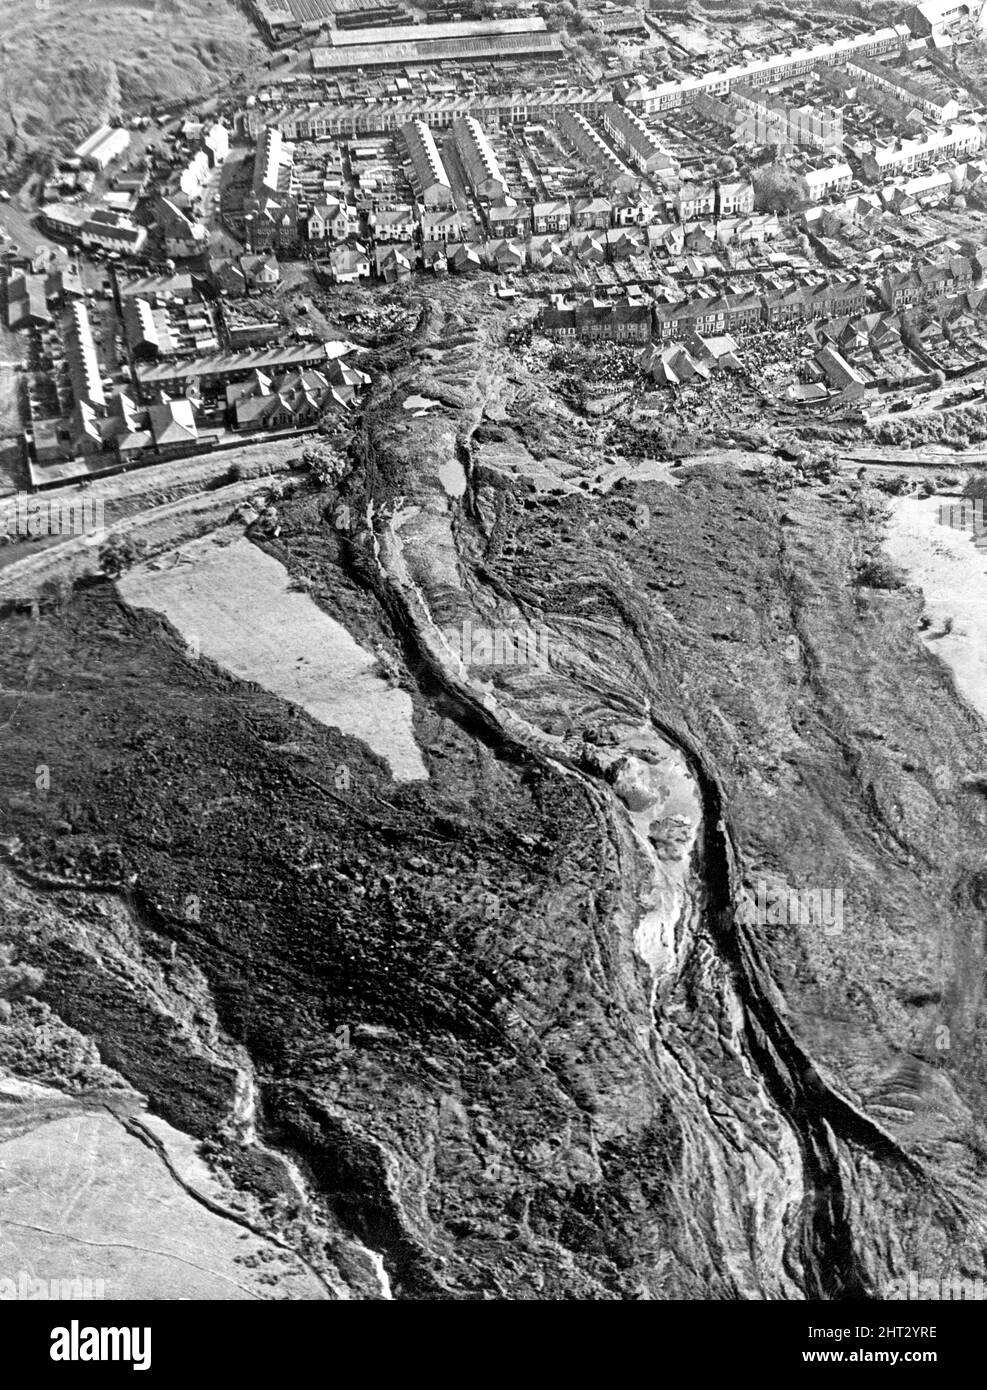 Aberfan, South Wales.  Picture taken 1pm on 21st October 1966.  Picture taken from the air, shows the top of the mountain and the mining spoil that has run down the hillside destroying the school and part of the town.  The Aberfan disaster was a catastrophic collapse of a colliery spoil tip in the Welsh village of Aberfan, near Merthyr Tydfil, on Friday 21st OCtober 1966. It was caused by a build-up of water in the accumulated rock and shale, which suddenly started to slide downhill in the form of slurry and engulfed The Pantglas Junior School below, on 21st October 1966, killing 116 children Stock Photo